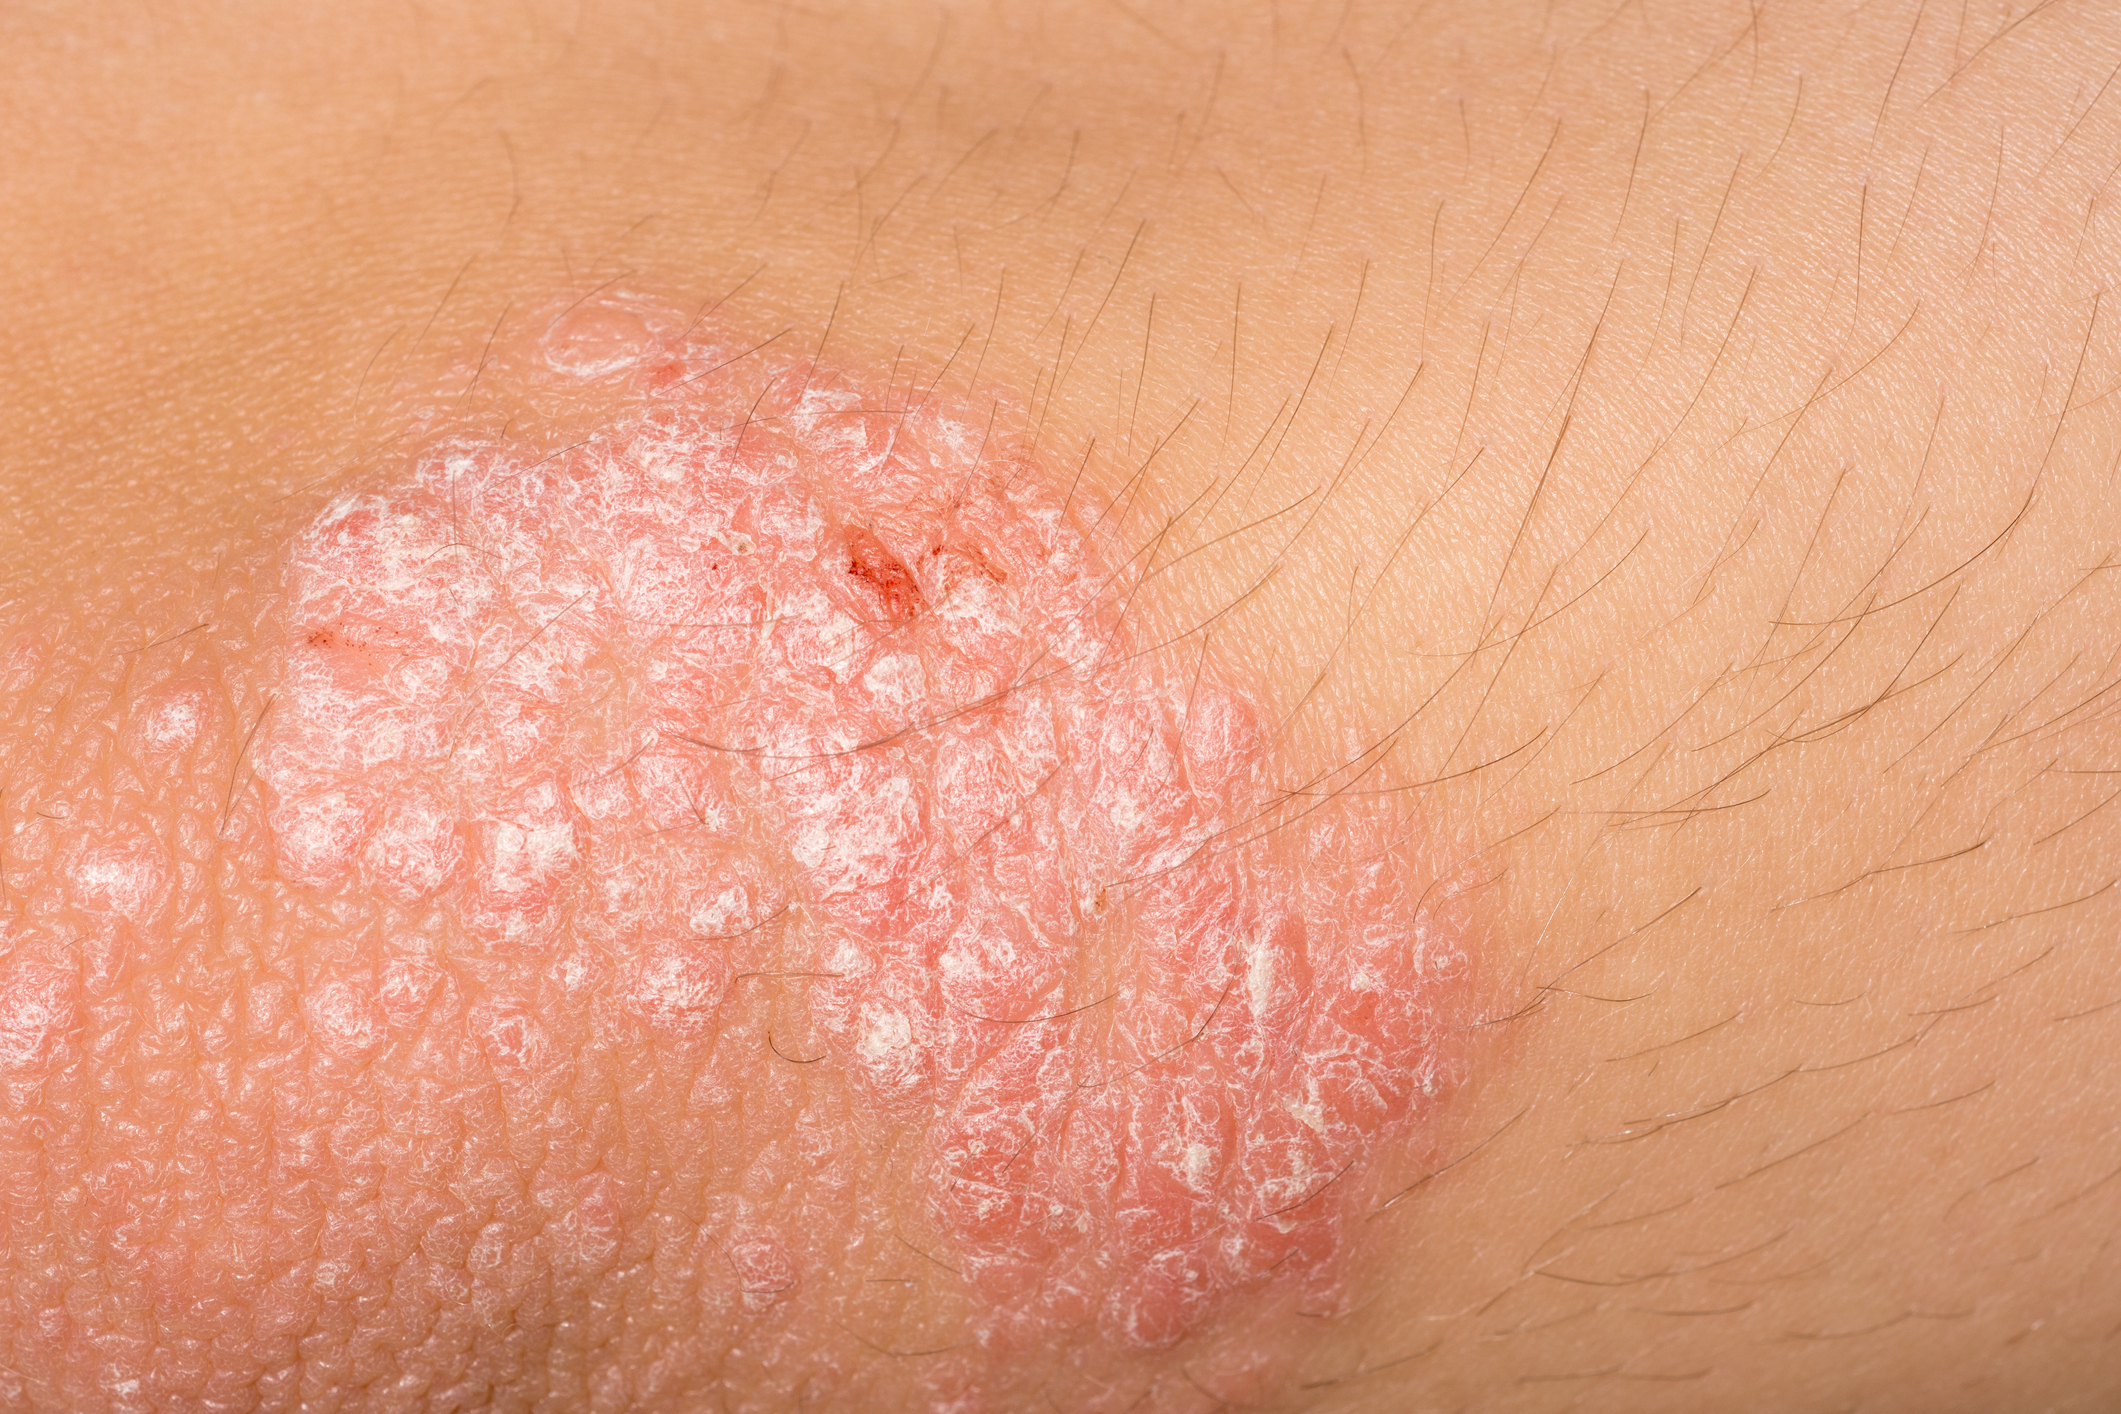 is psoriasis infectious